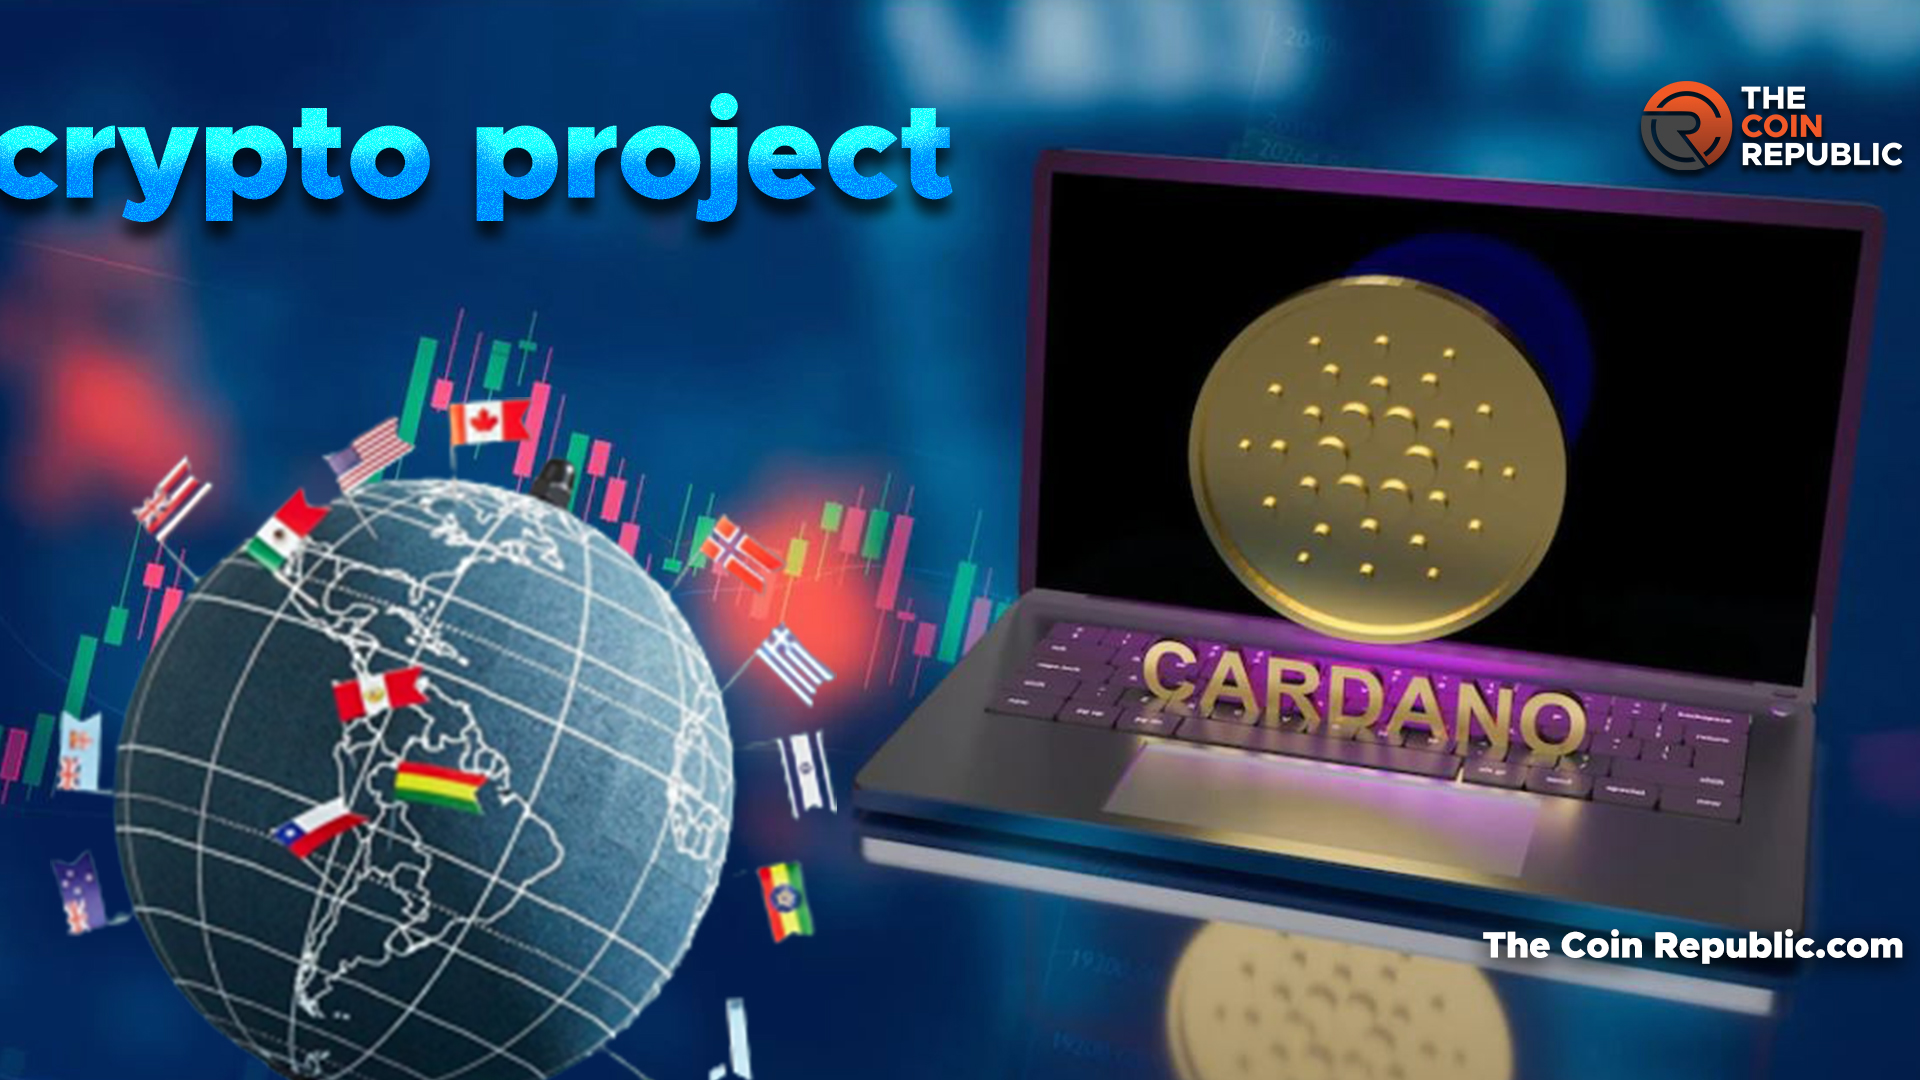 3rd most-targeted crypto project by scammers: Cardano